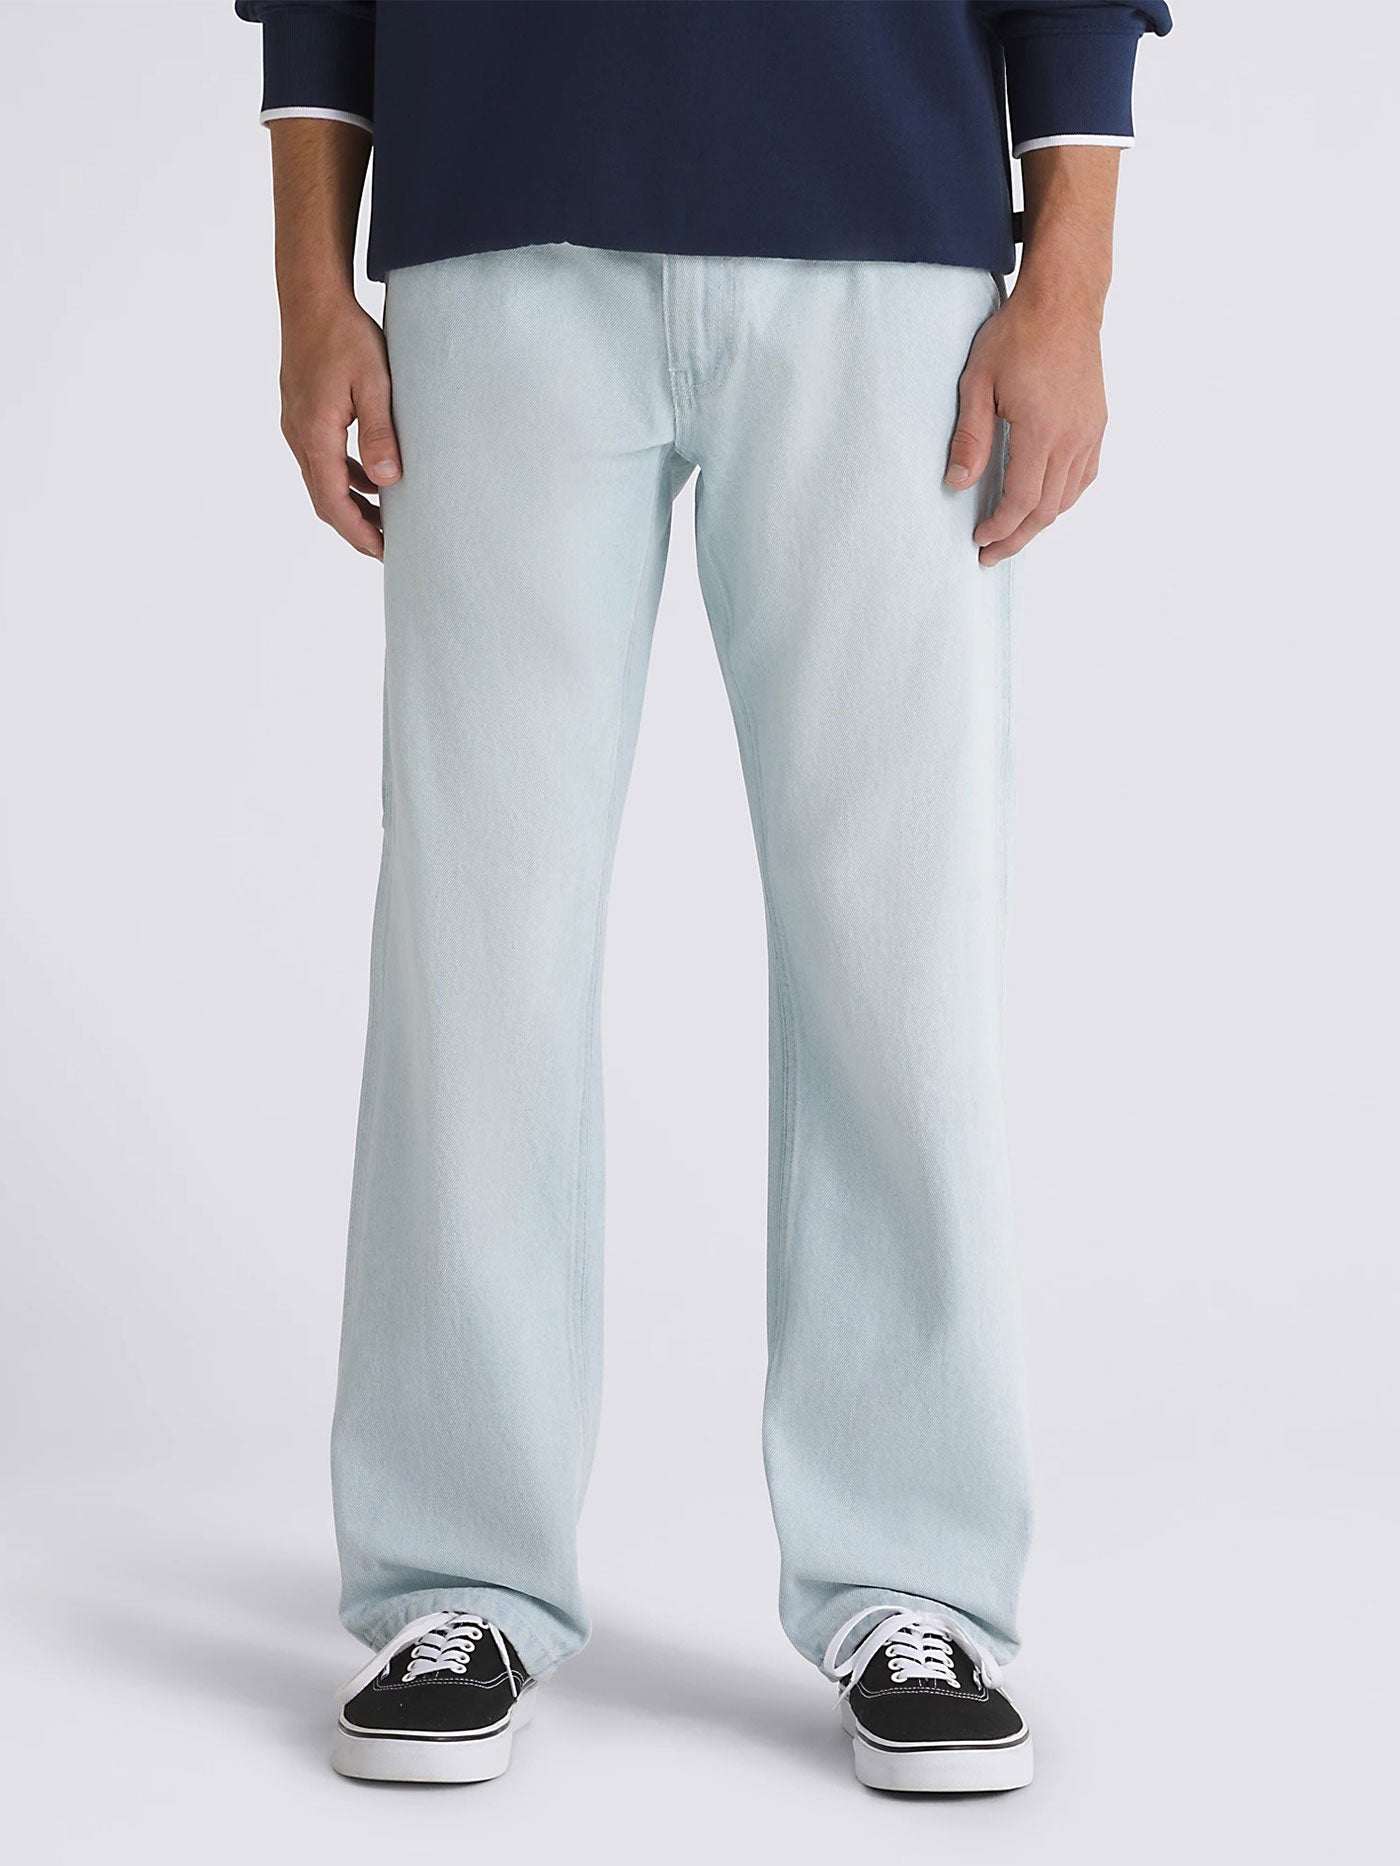 Vans Drill Chore Relaxed Carpenter Jeans Spring 2024